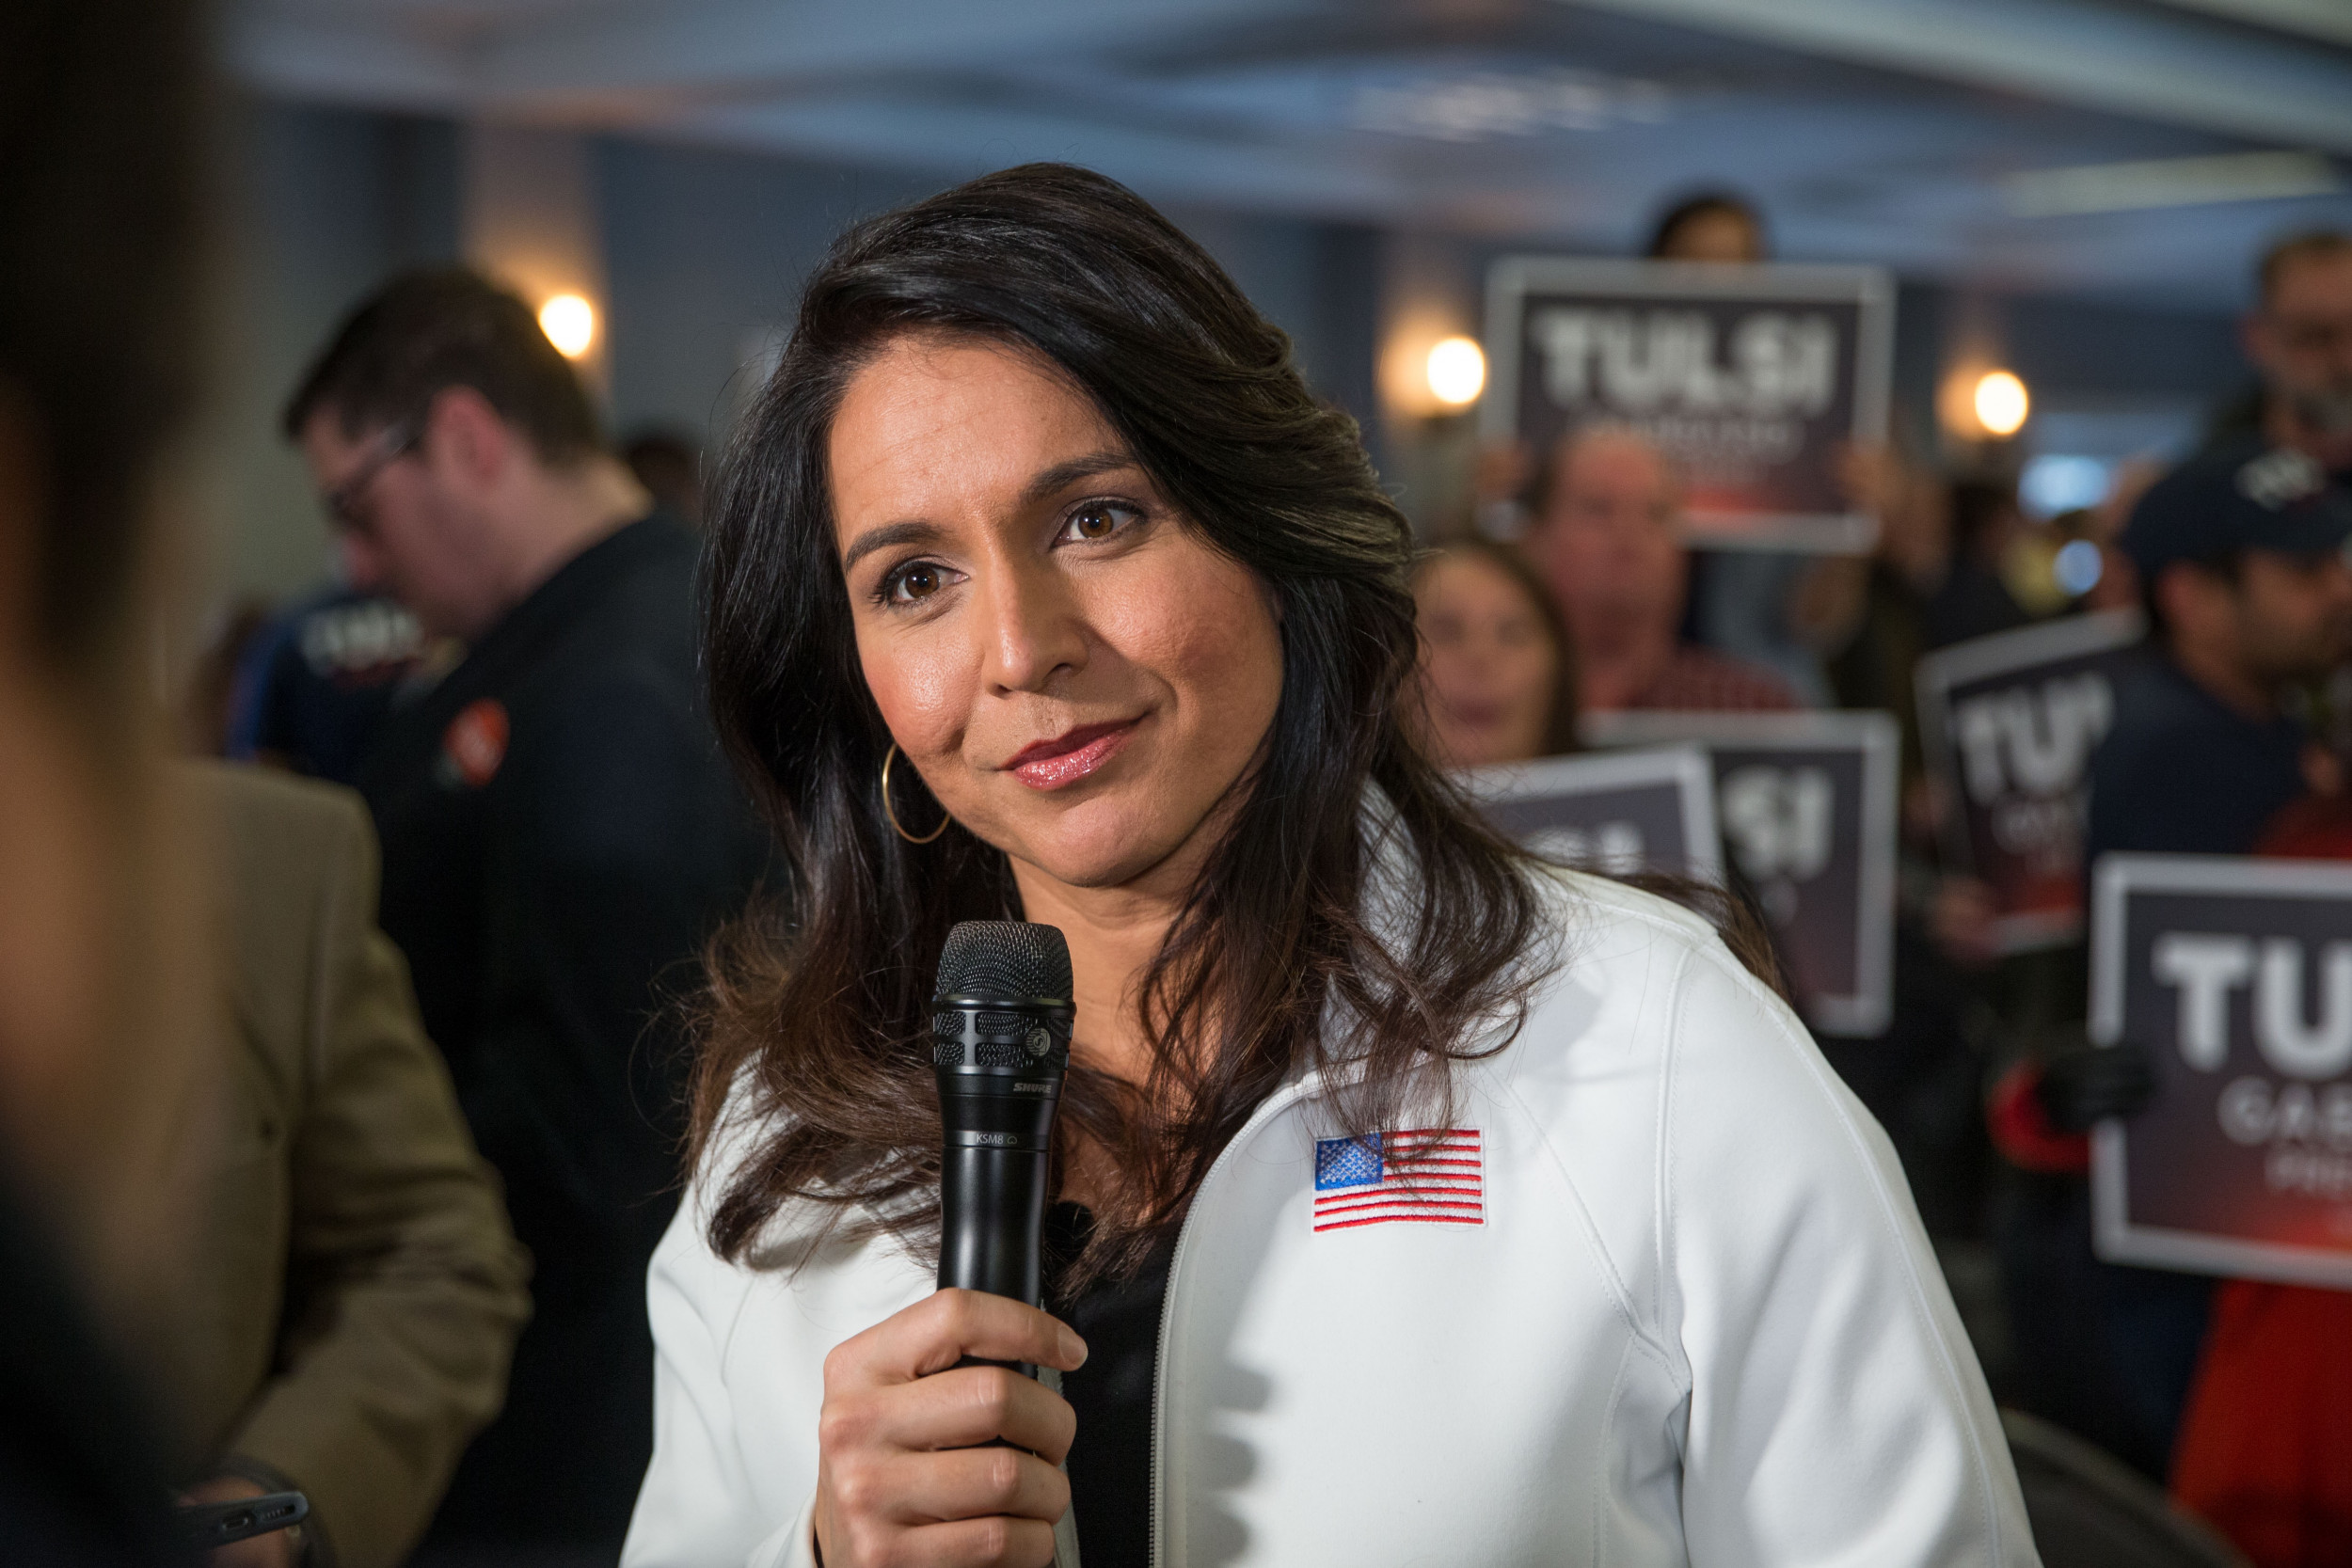 Why Is Tulsi Gabbard Still In The 2020 Presidential Race After Better Polling Democrats Dropped Out